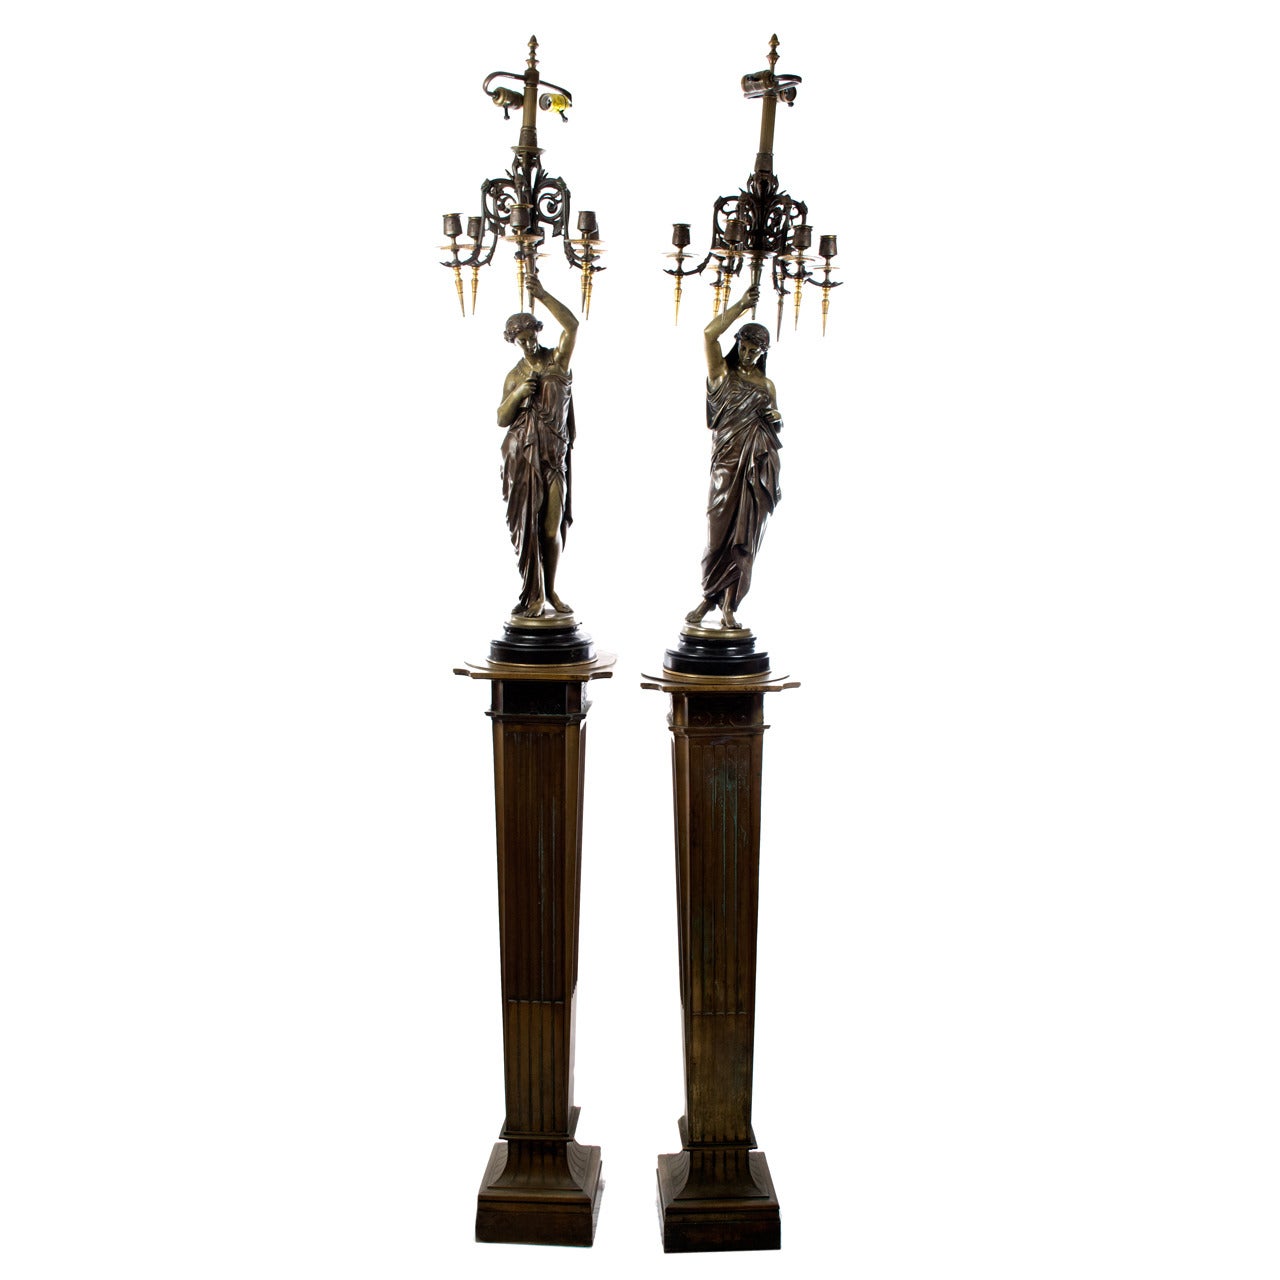 Pair of Monumental Bronze Candelabra Sculptures on Stands by Émile Picault